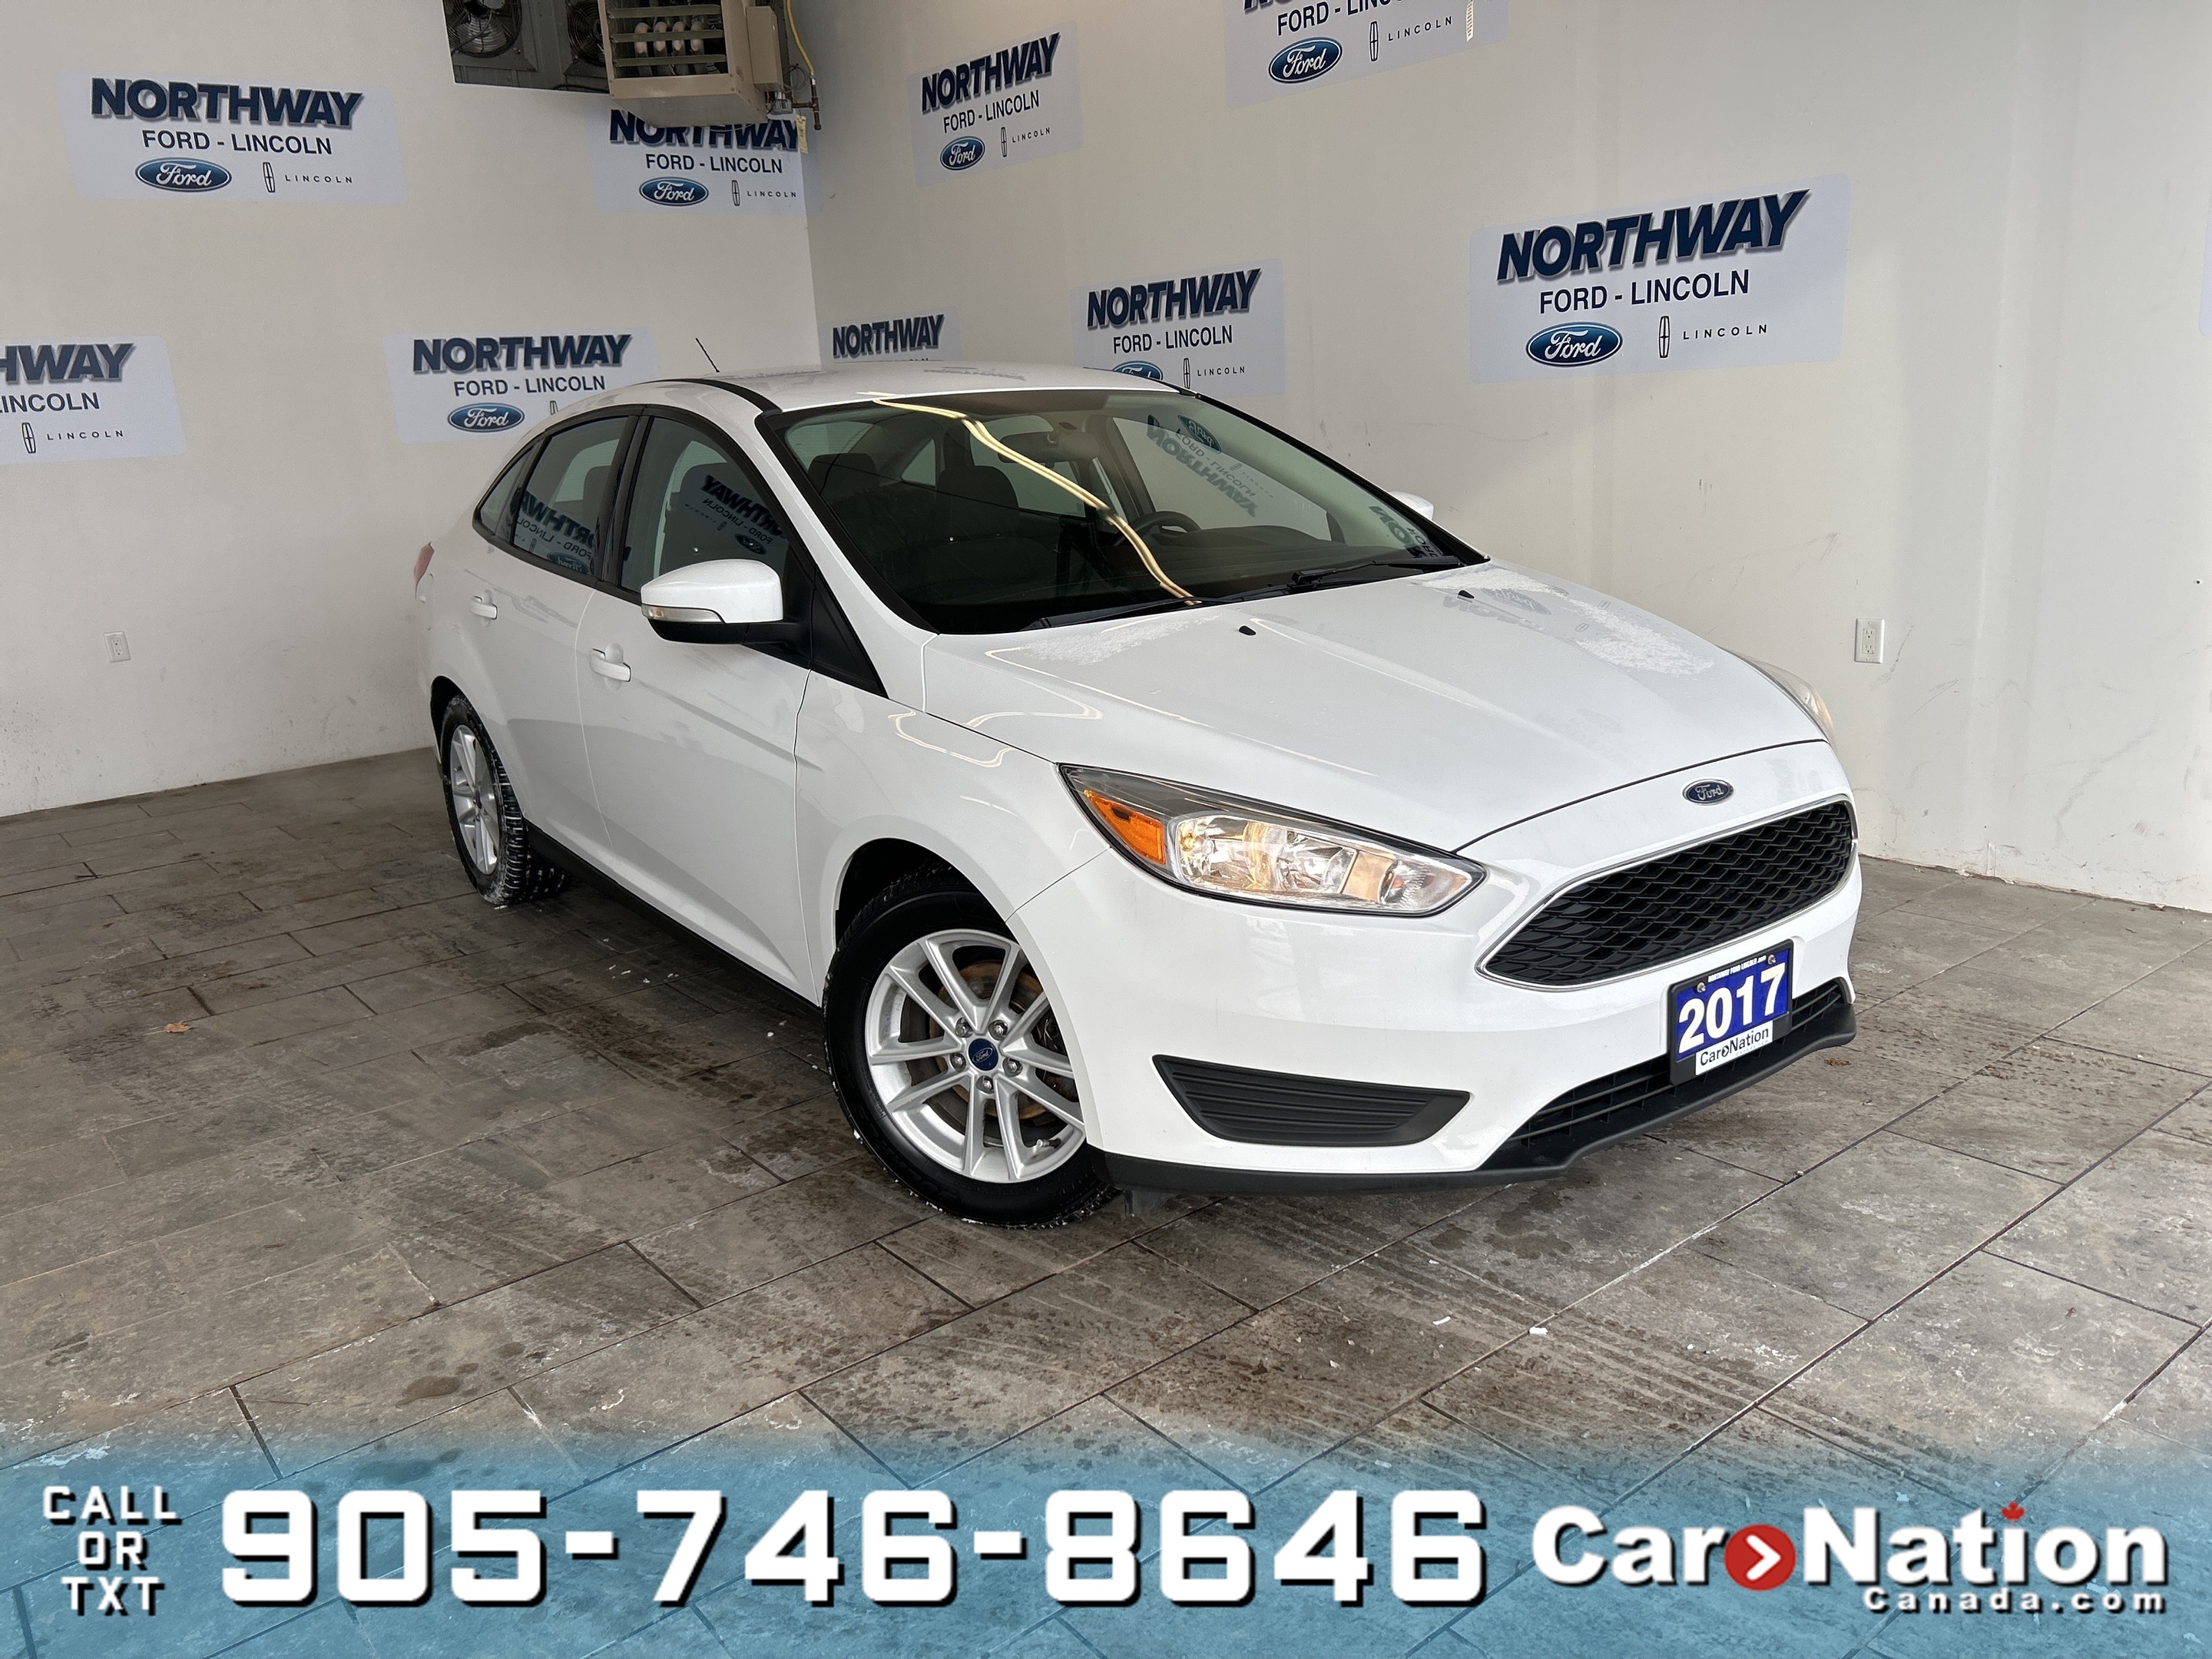 2017 Ford Focus SE | REAR CAM | ALLOYS | WE WANT YOUR TRADE! 